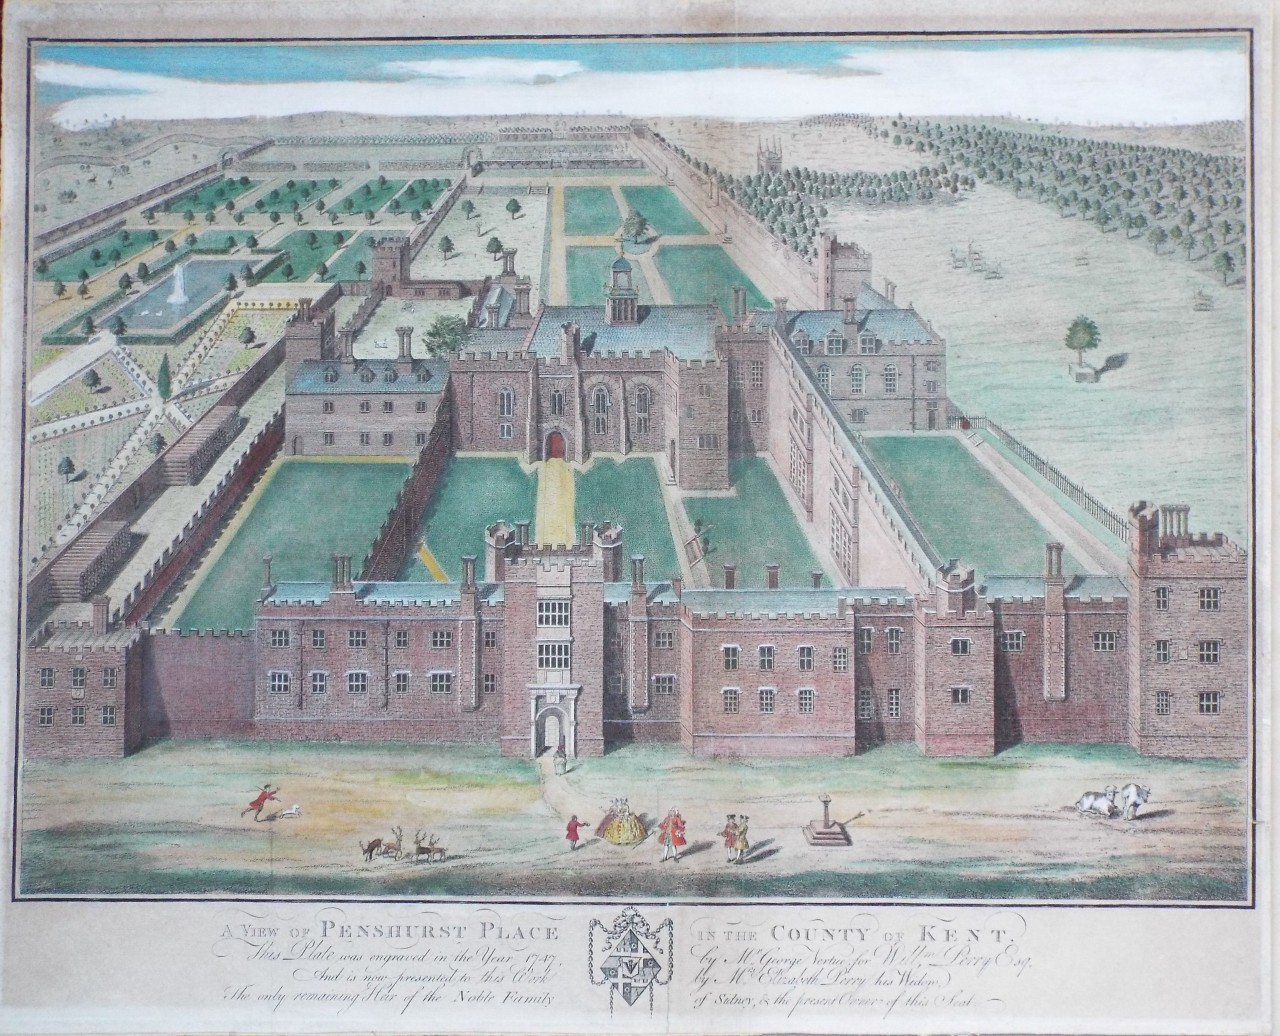 Print - A View of Penshurst Place in the County of Kent. - Vertue